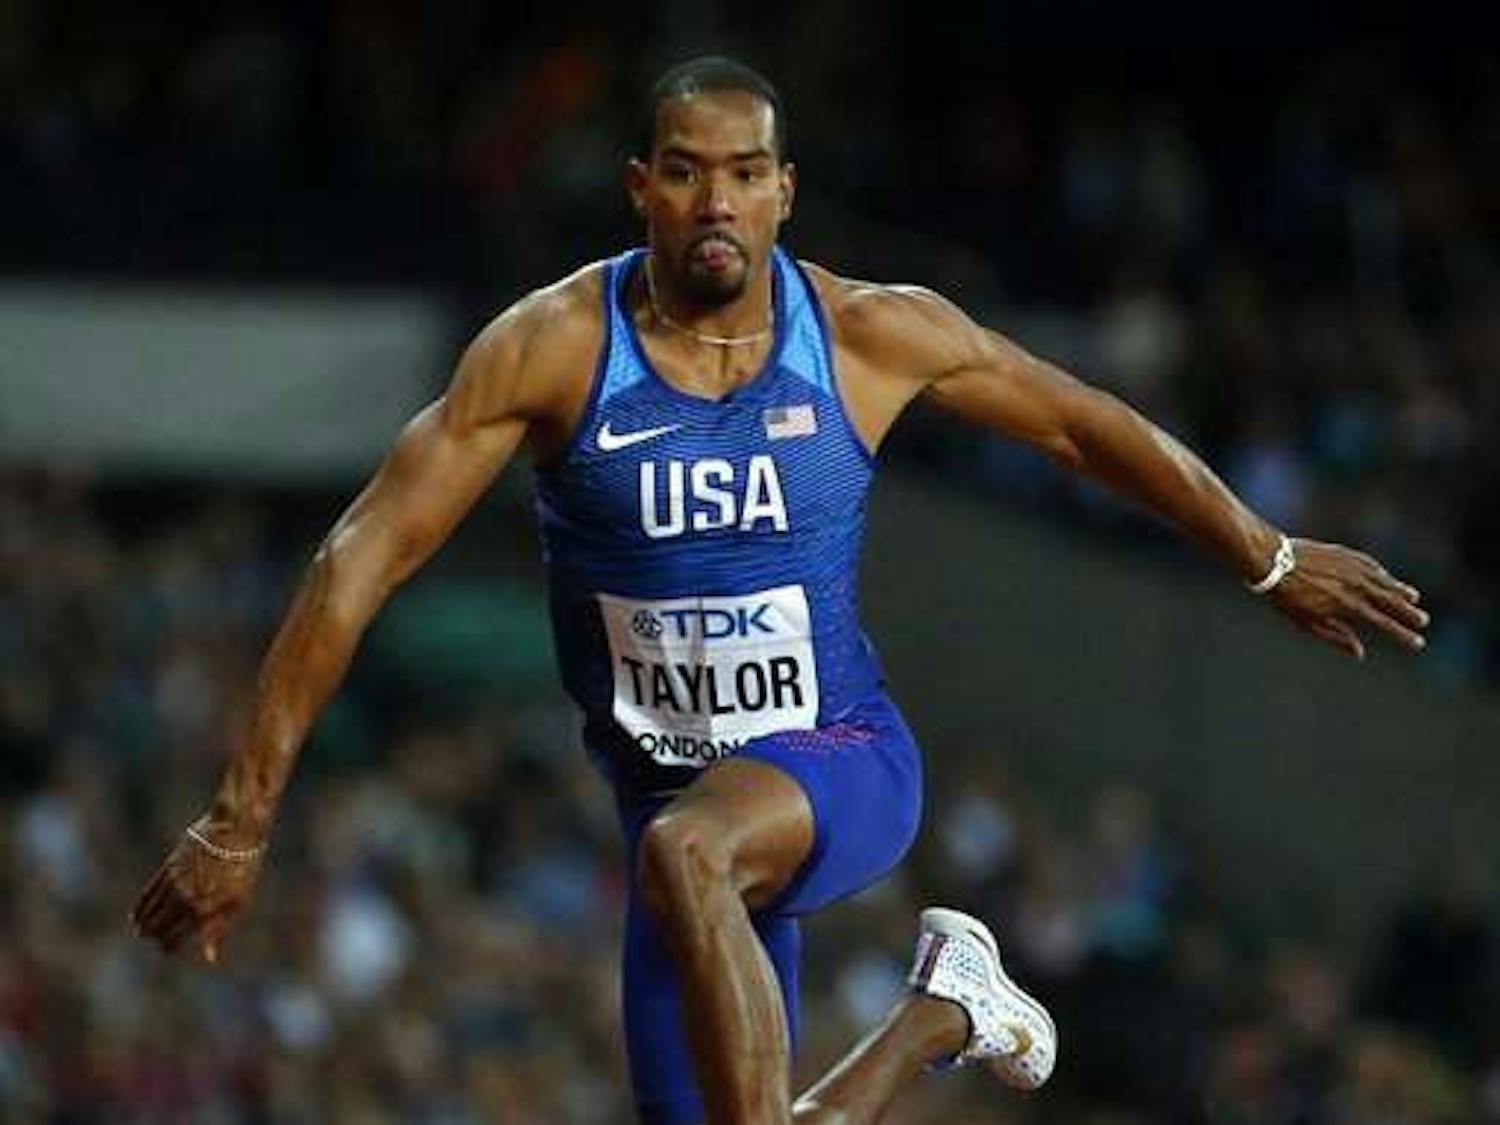 Former Gator and two-time Olympic gold medalist Christian Taylor competed Thursday in Day 1 of the Pepsi Florida Relays.